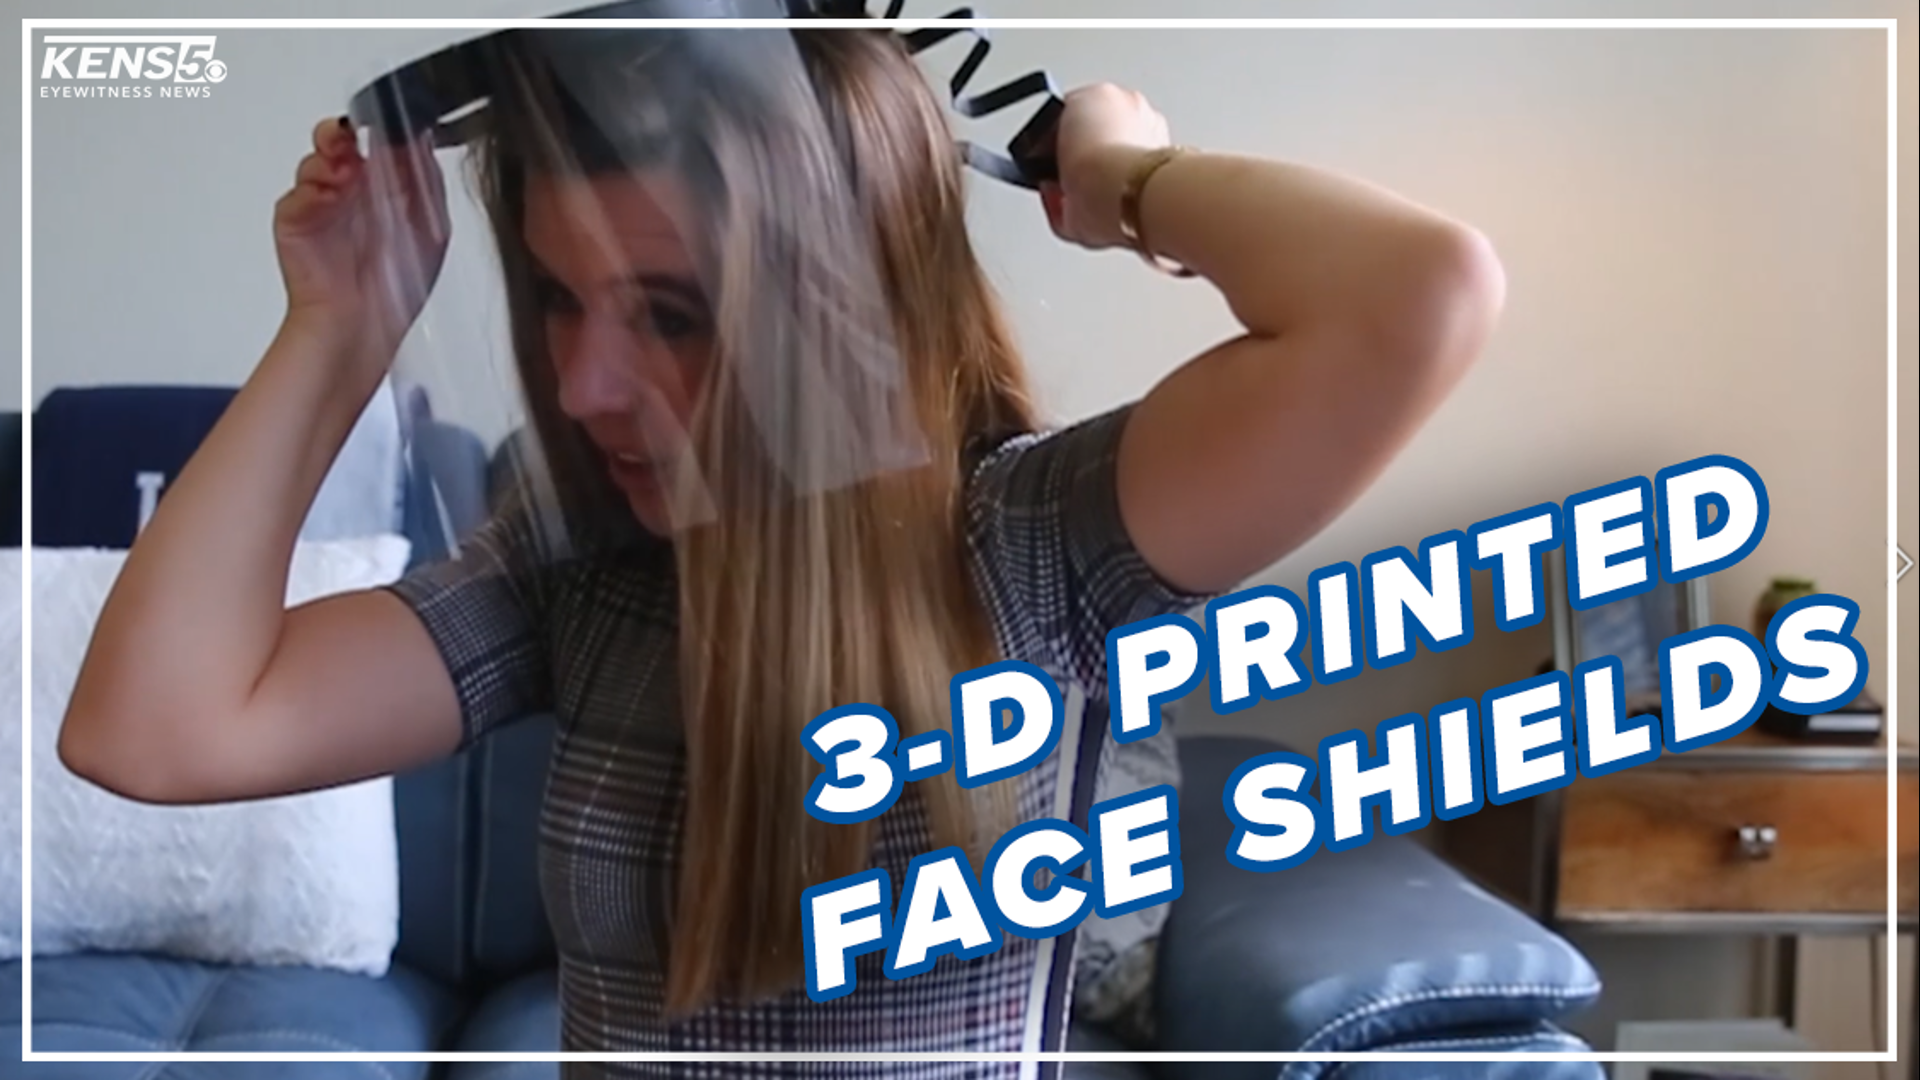 A local company uses 3-D printers to make pieces for drones. Now, they're also using the printers to make face shields for the community.